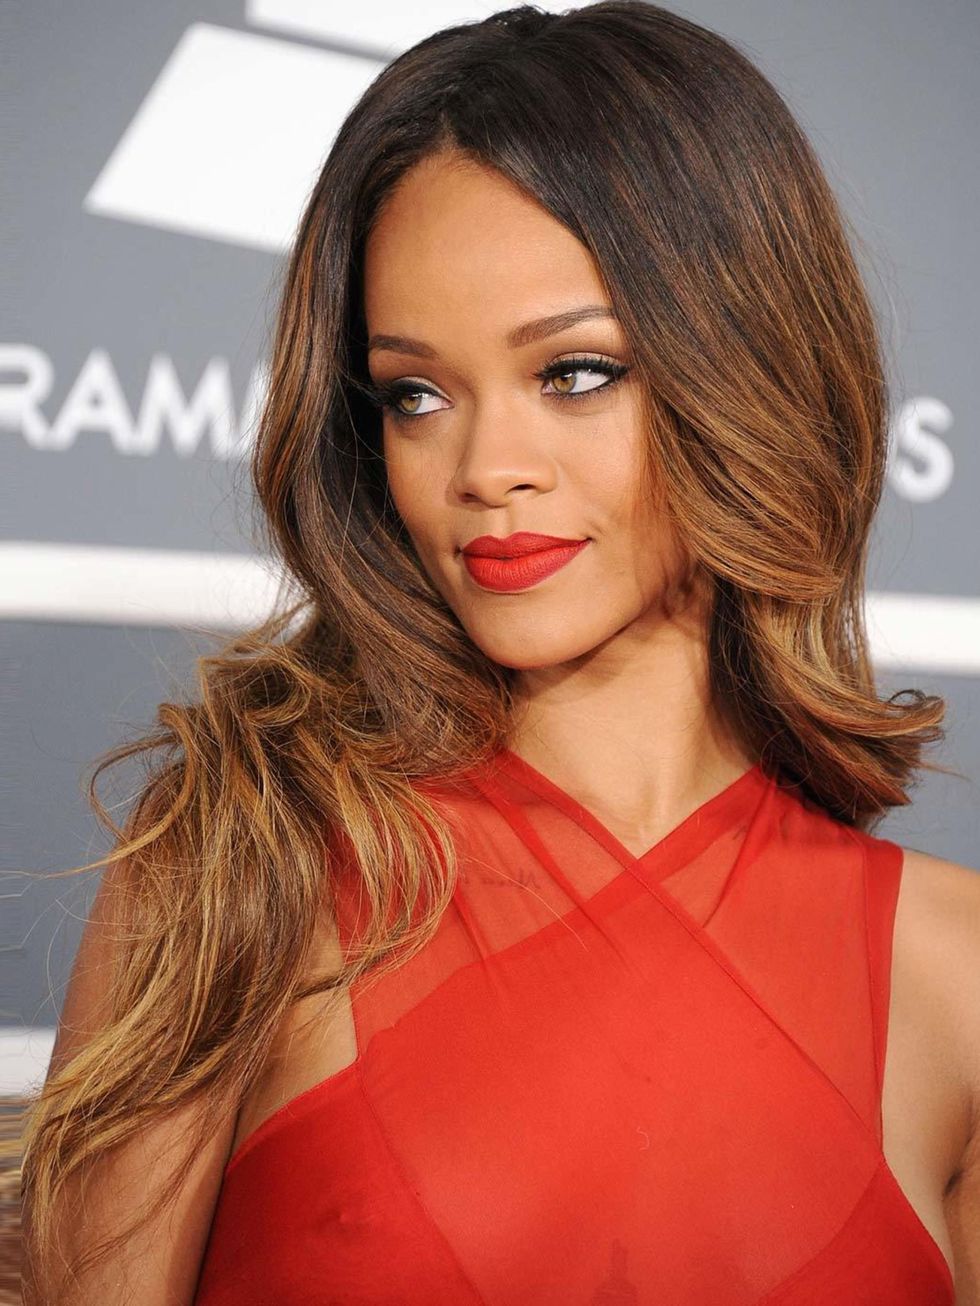 <p>In a word - wow. <a href="http://www.elleuk.com/fashion/news/rihanna-river-island">Rihanna</a> is a beauty chameleon and her <a href="http://www.elleuk.com/fashion/news/grammys-2013-winners-highlights">Grammys</a> red carpet offering was nothing short 